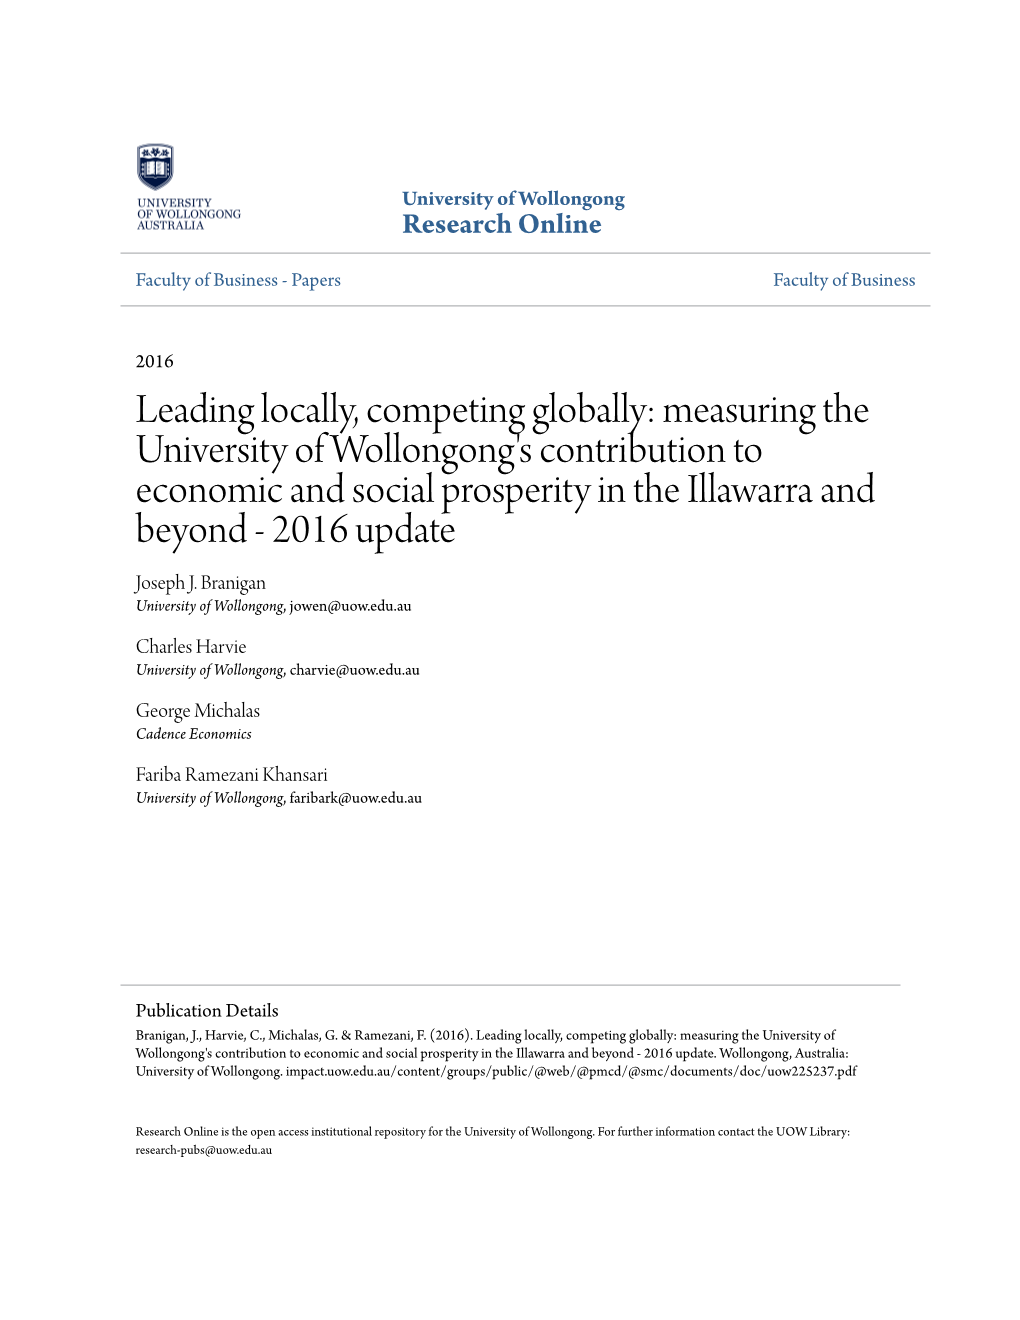 Measuring the University of Wollongong's Contribution to Economic and Social Prosperity in the Illawarra and Beyond - 2016 Update Joseph J